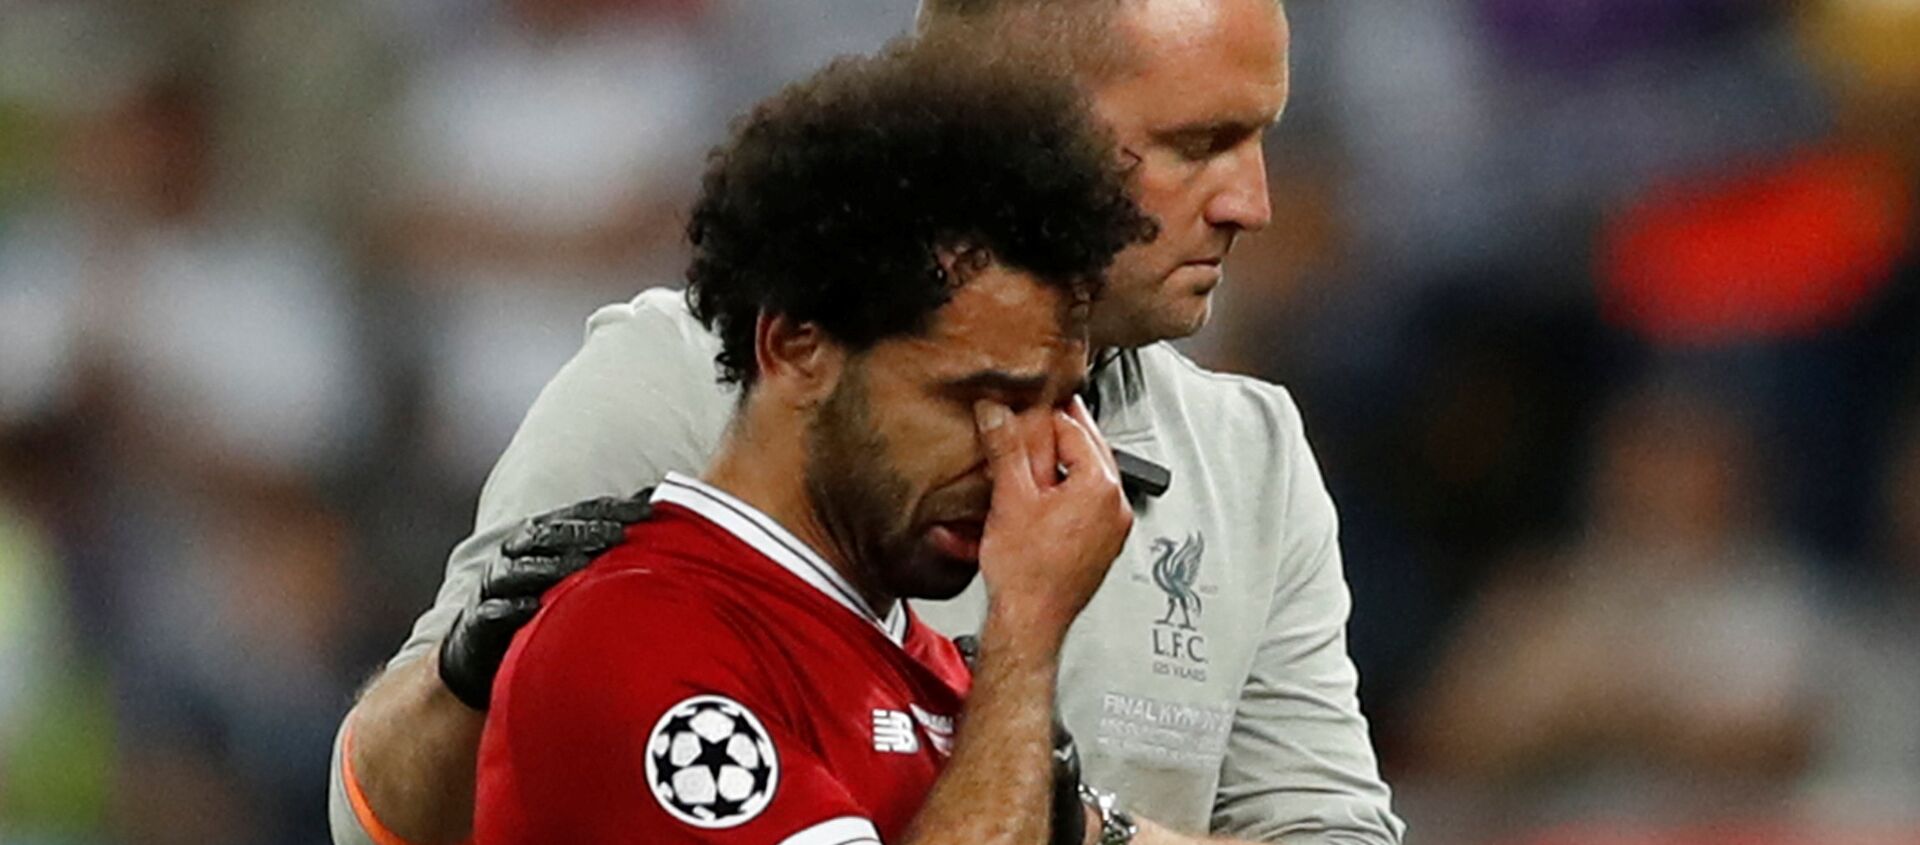 Soccer Football - Champions League Final - Real Madrid v Liverpool - NSC Olympic Stadium, Kiev, Ukraine - May 26, 2018 Liverpool's Mohamed Salah looks dejected as he is substituted off due to injury - اسپوتنیک افغانستان  , 1920, 15.04.2021